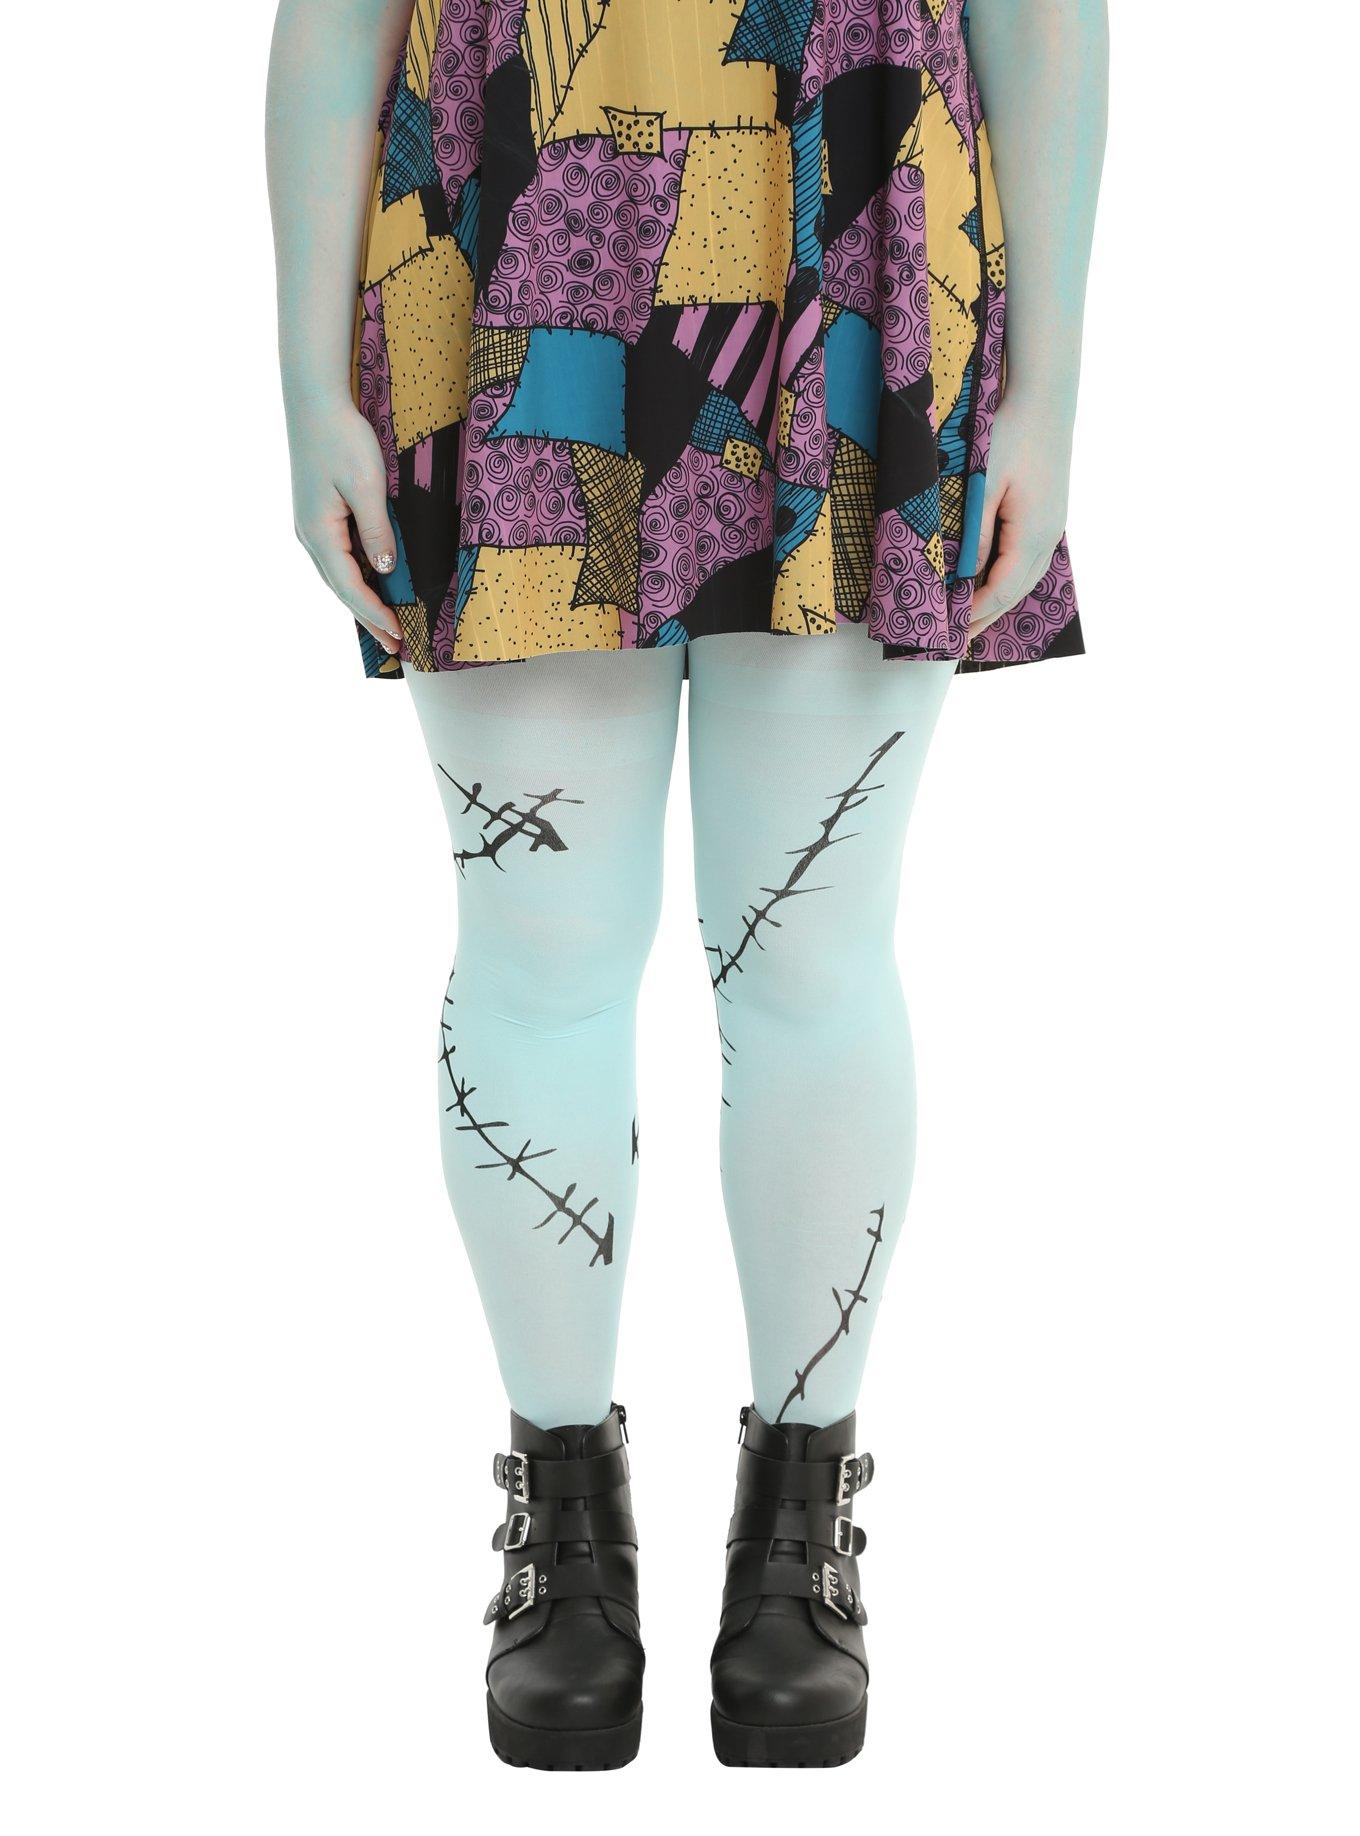 The Nightmare Before Christmas Sally Tights Plus Size, TAN/BEIGE, hi-res